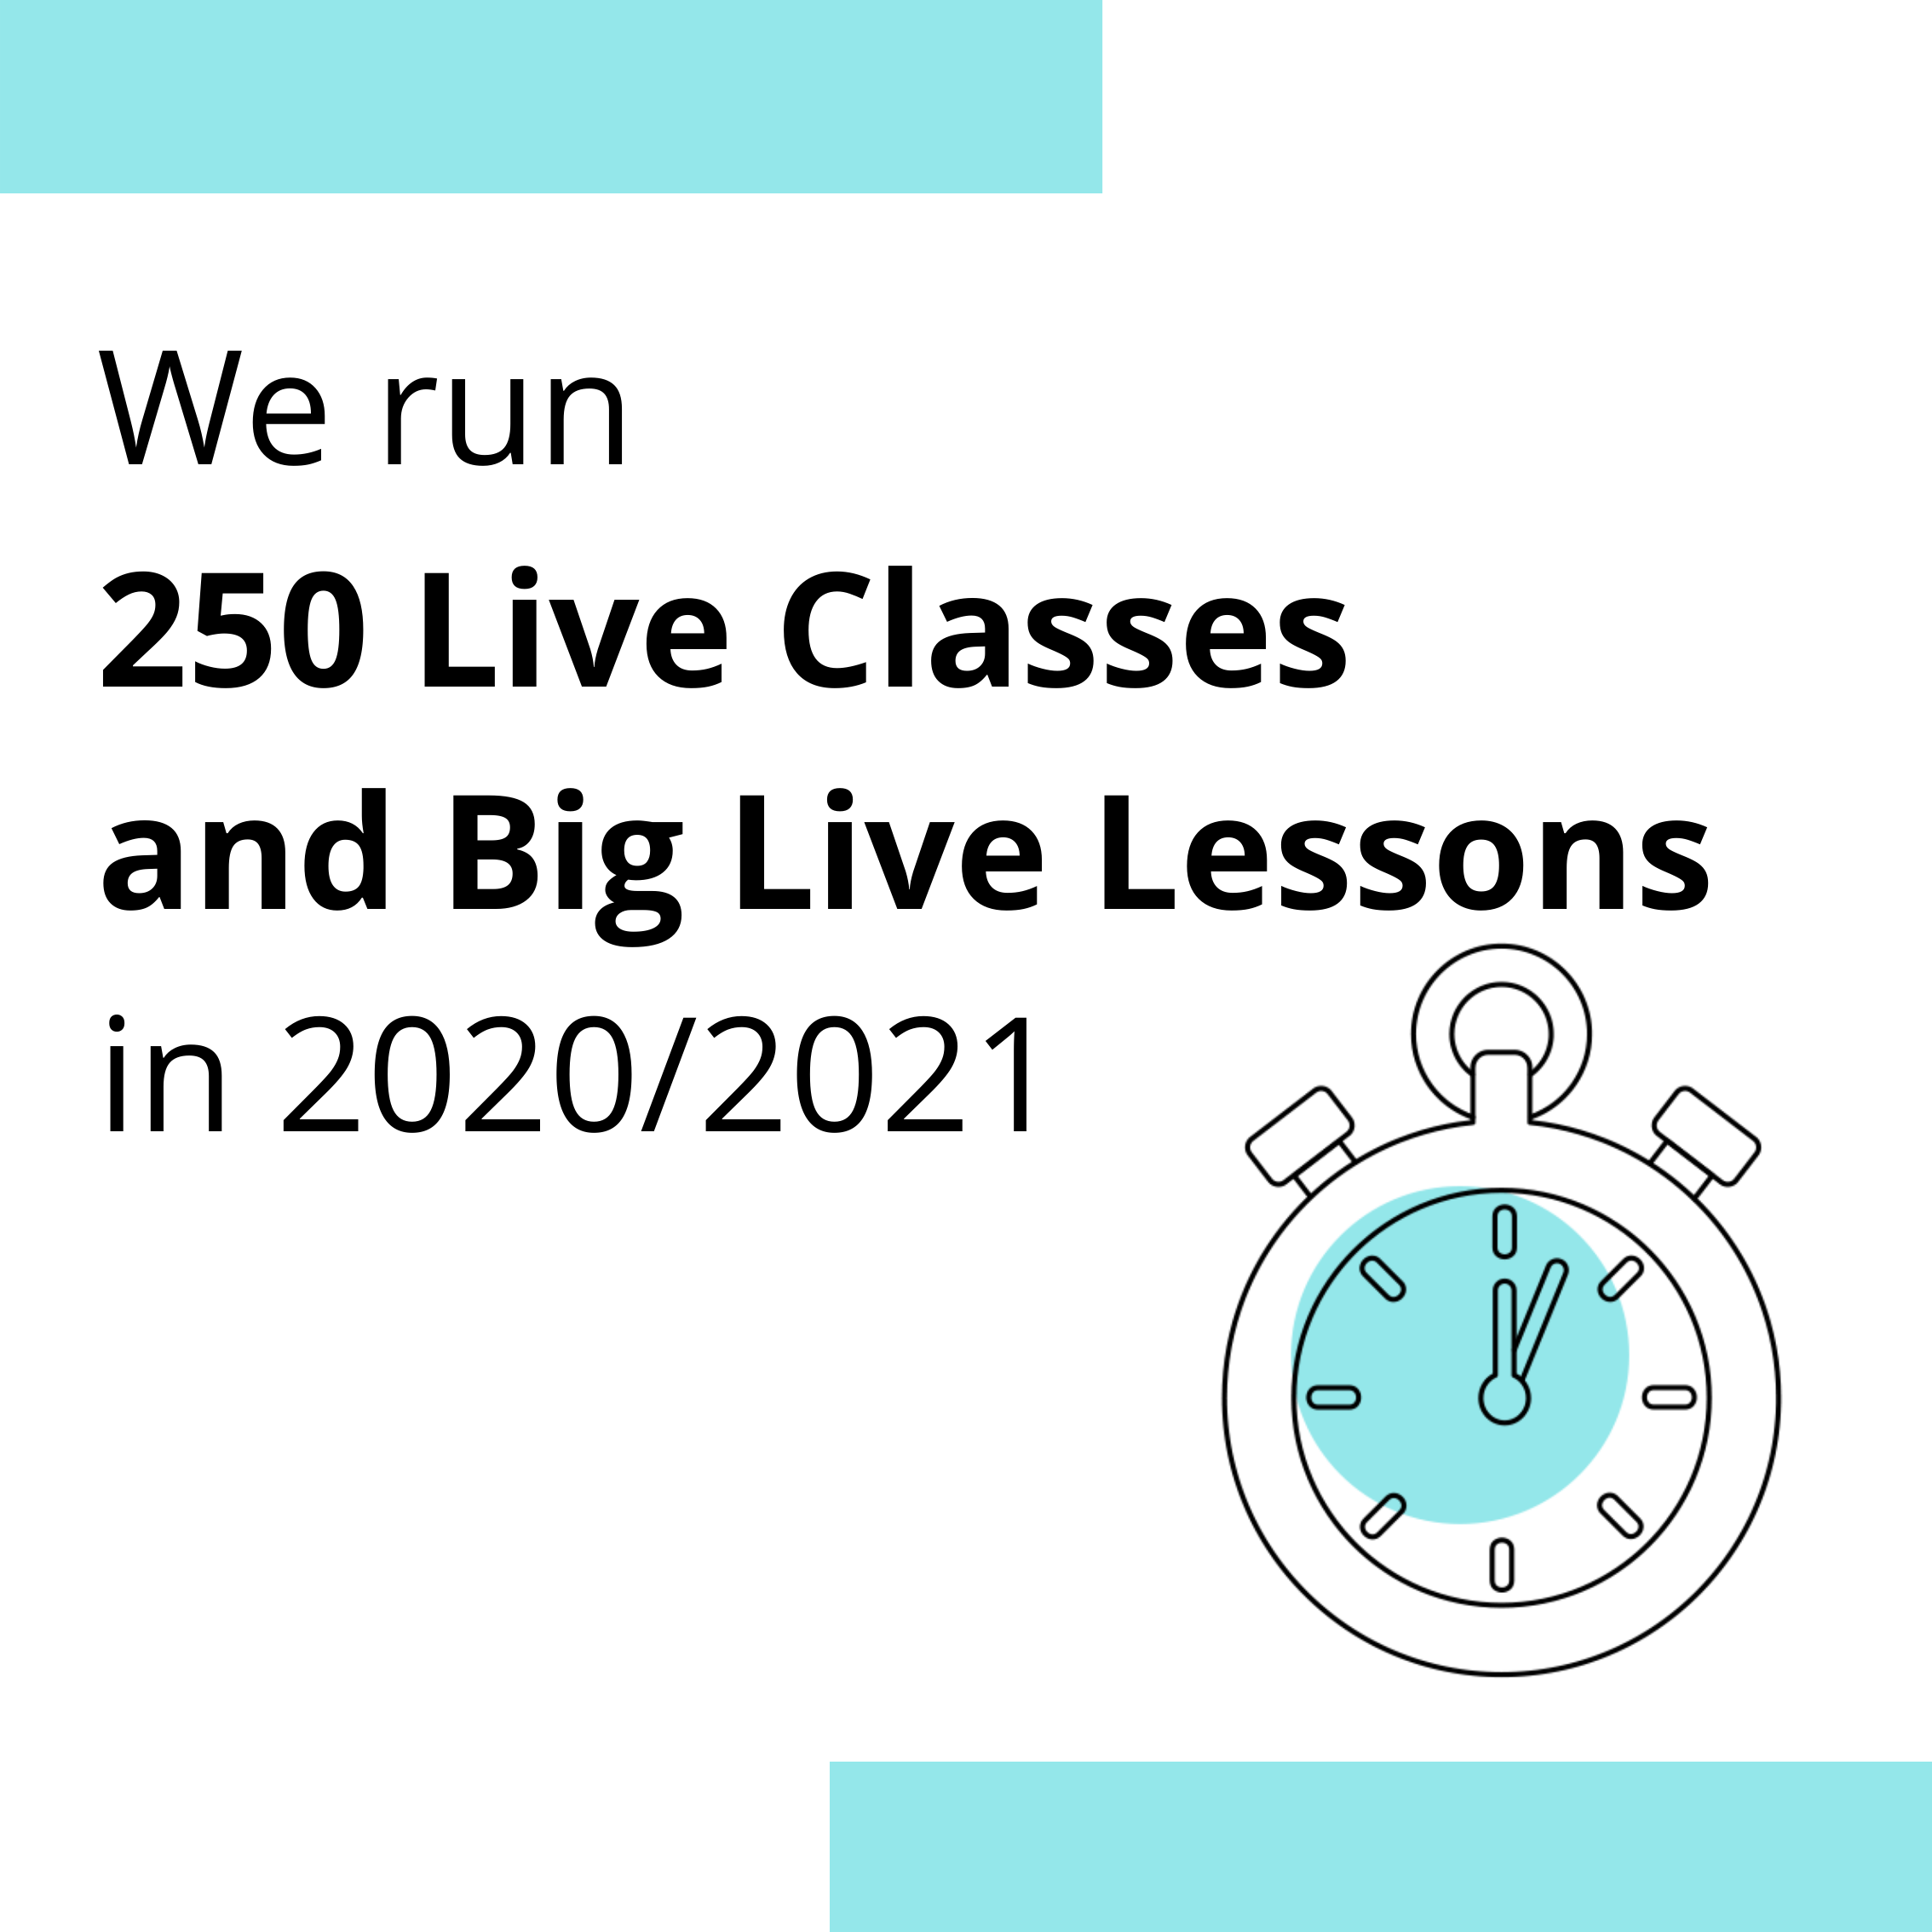 Stat - we have run 250 live classes and Big Live Lessons in 2020/2021